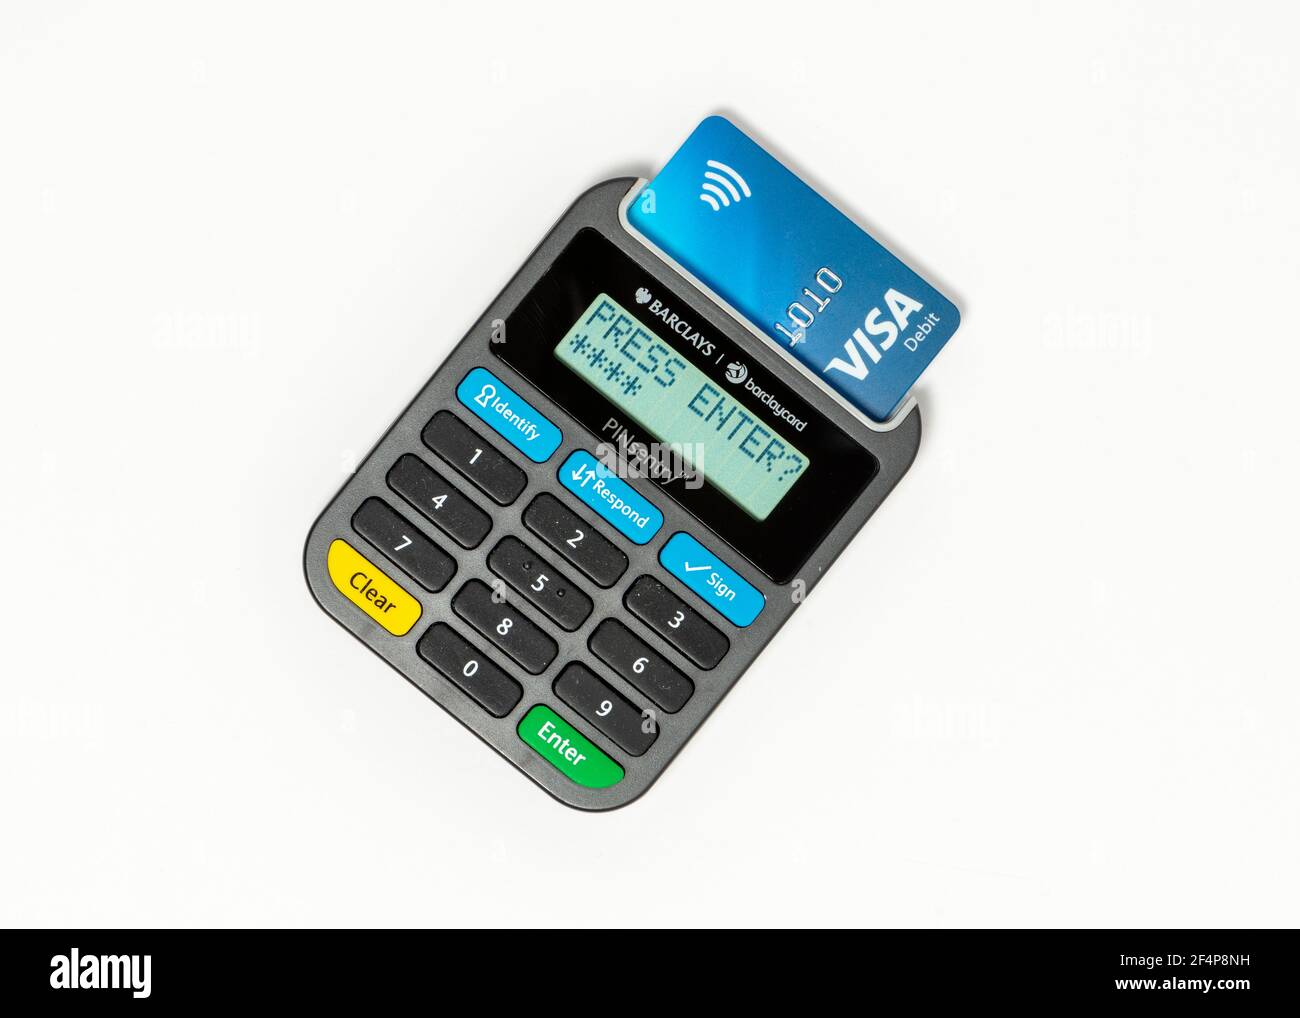 Press enter text on a Barclays Pinsentry card reader device display and a Visa Debit card Stock Photo